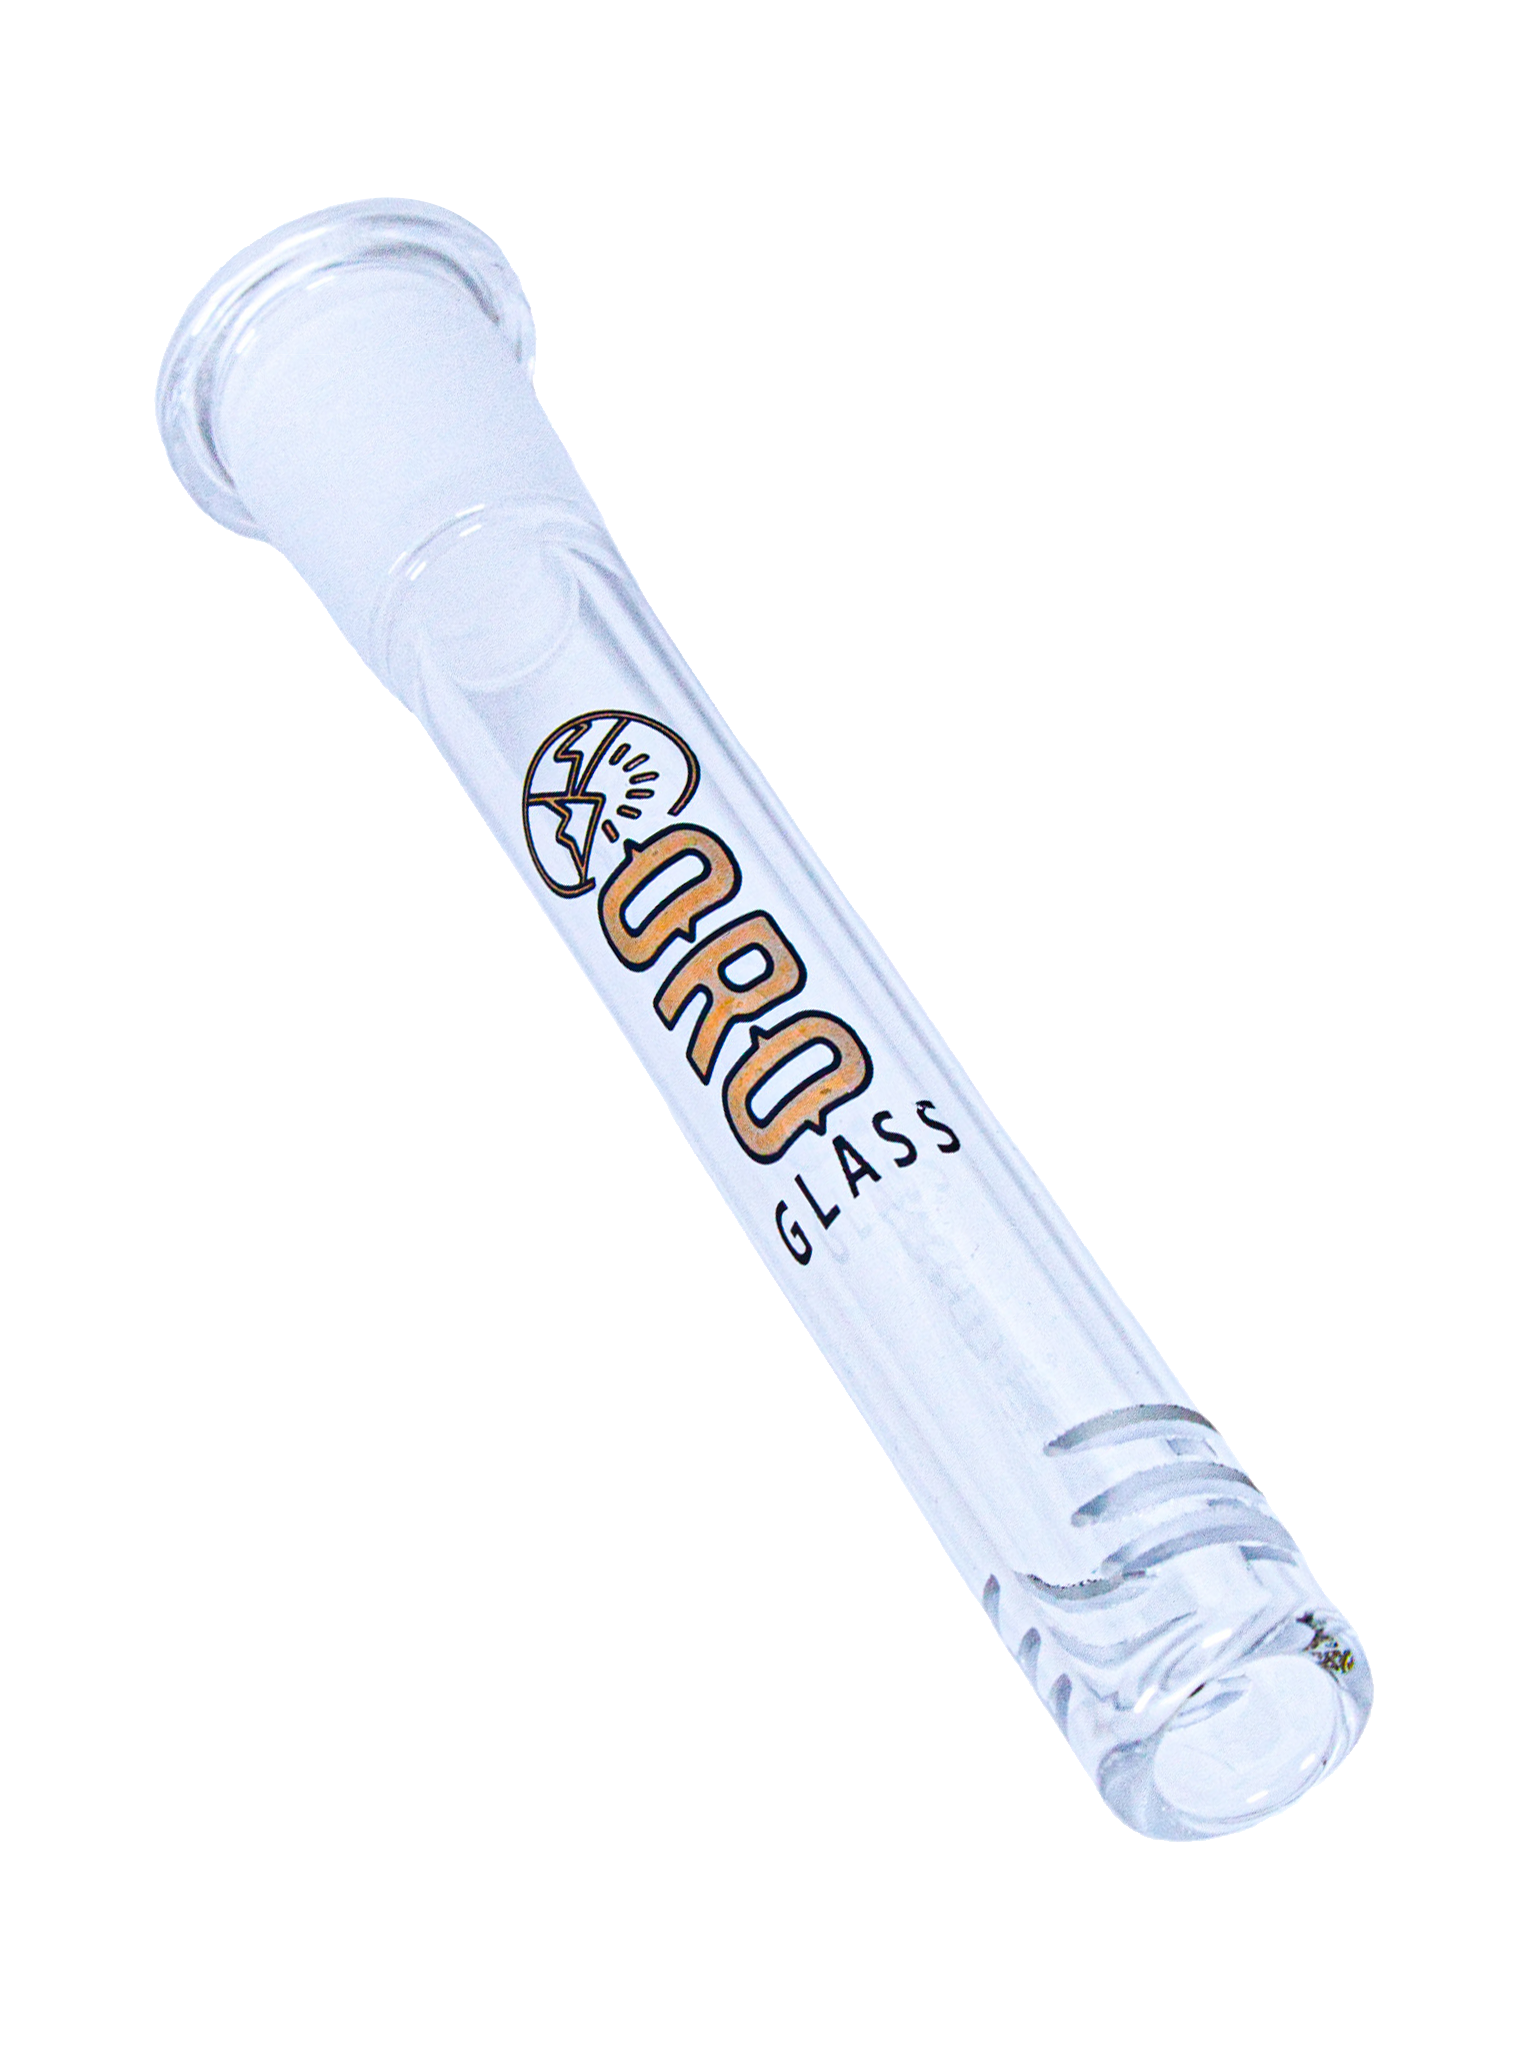 An Oro 18mm to 14mm Diffused Downstem